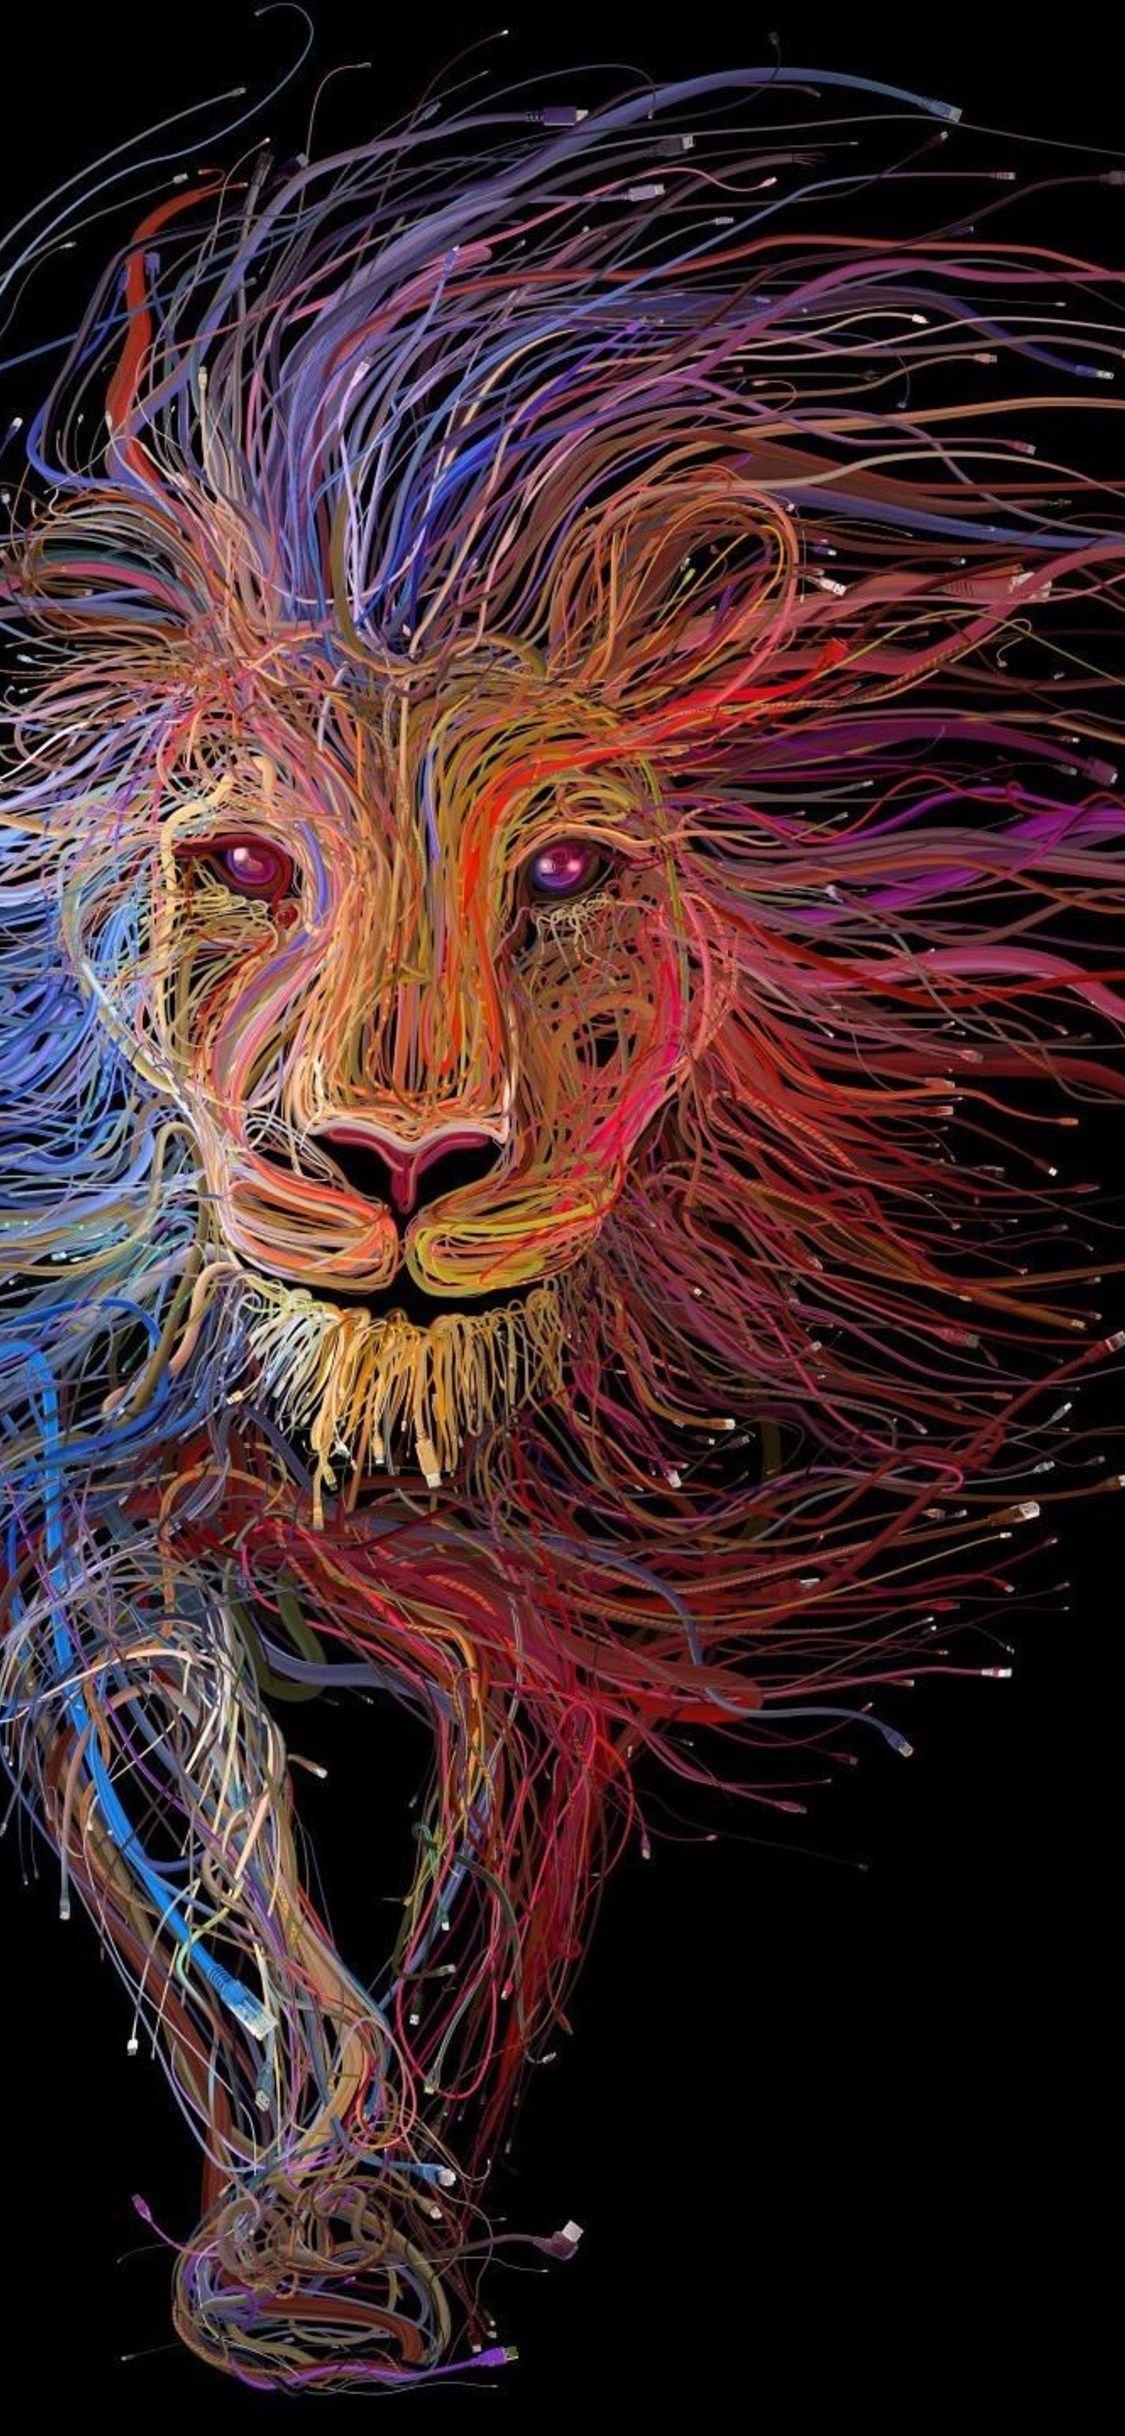 Lion Wires Art In 1125x2436 Resolution. Lion wallpaper iphone, Abstract lion, Lion wallpaper